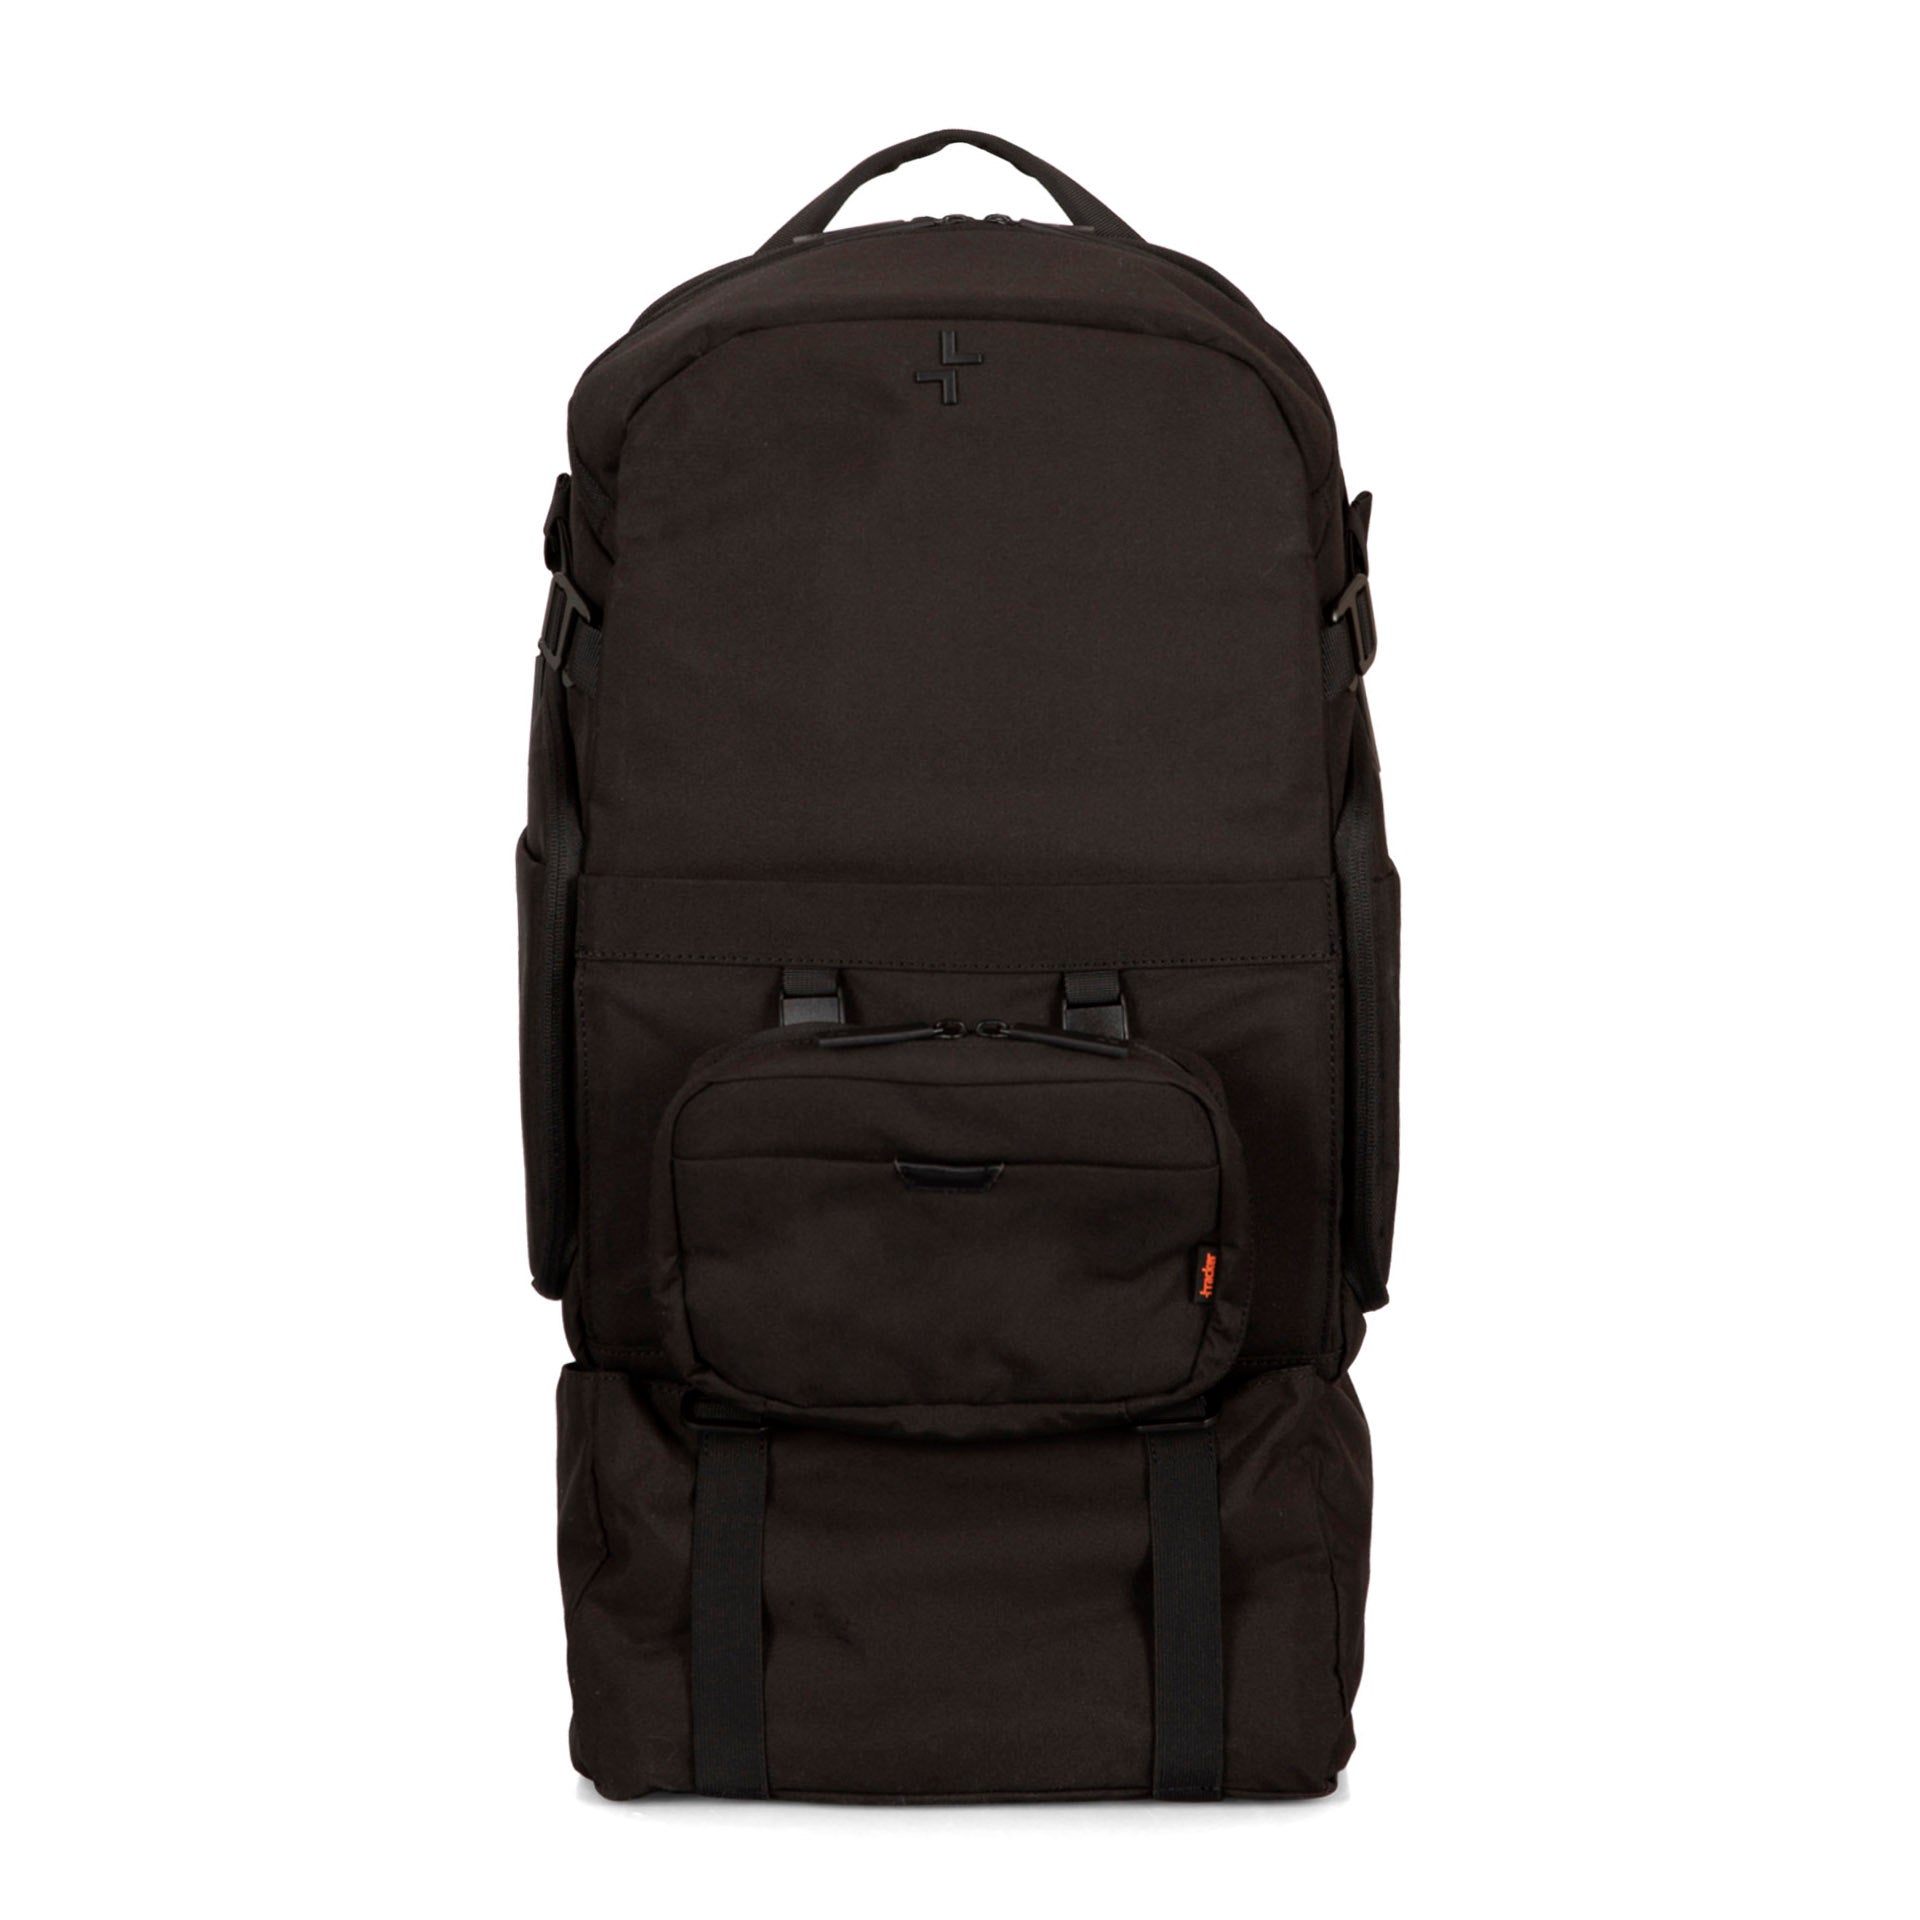 Tracker The 5 Continents Backpack – Bentley